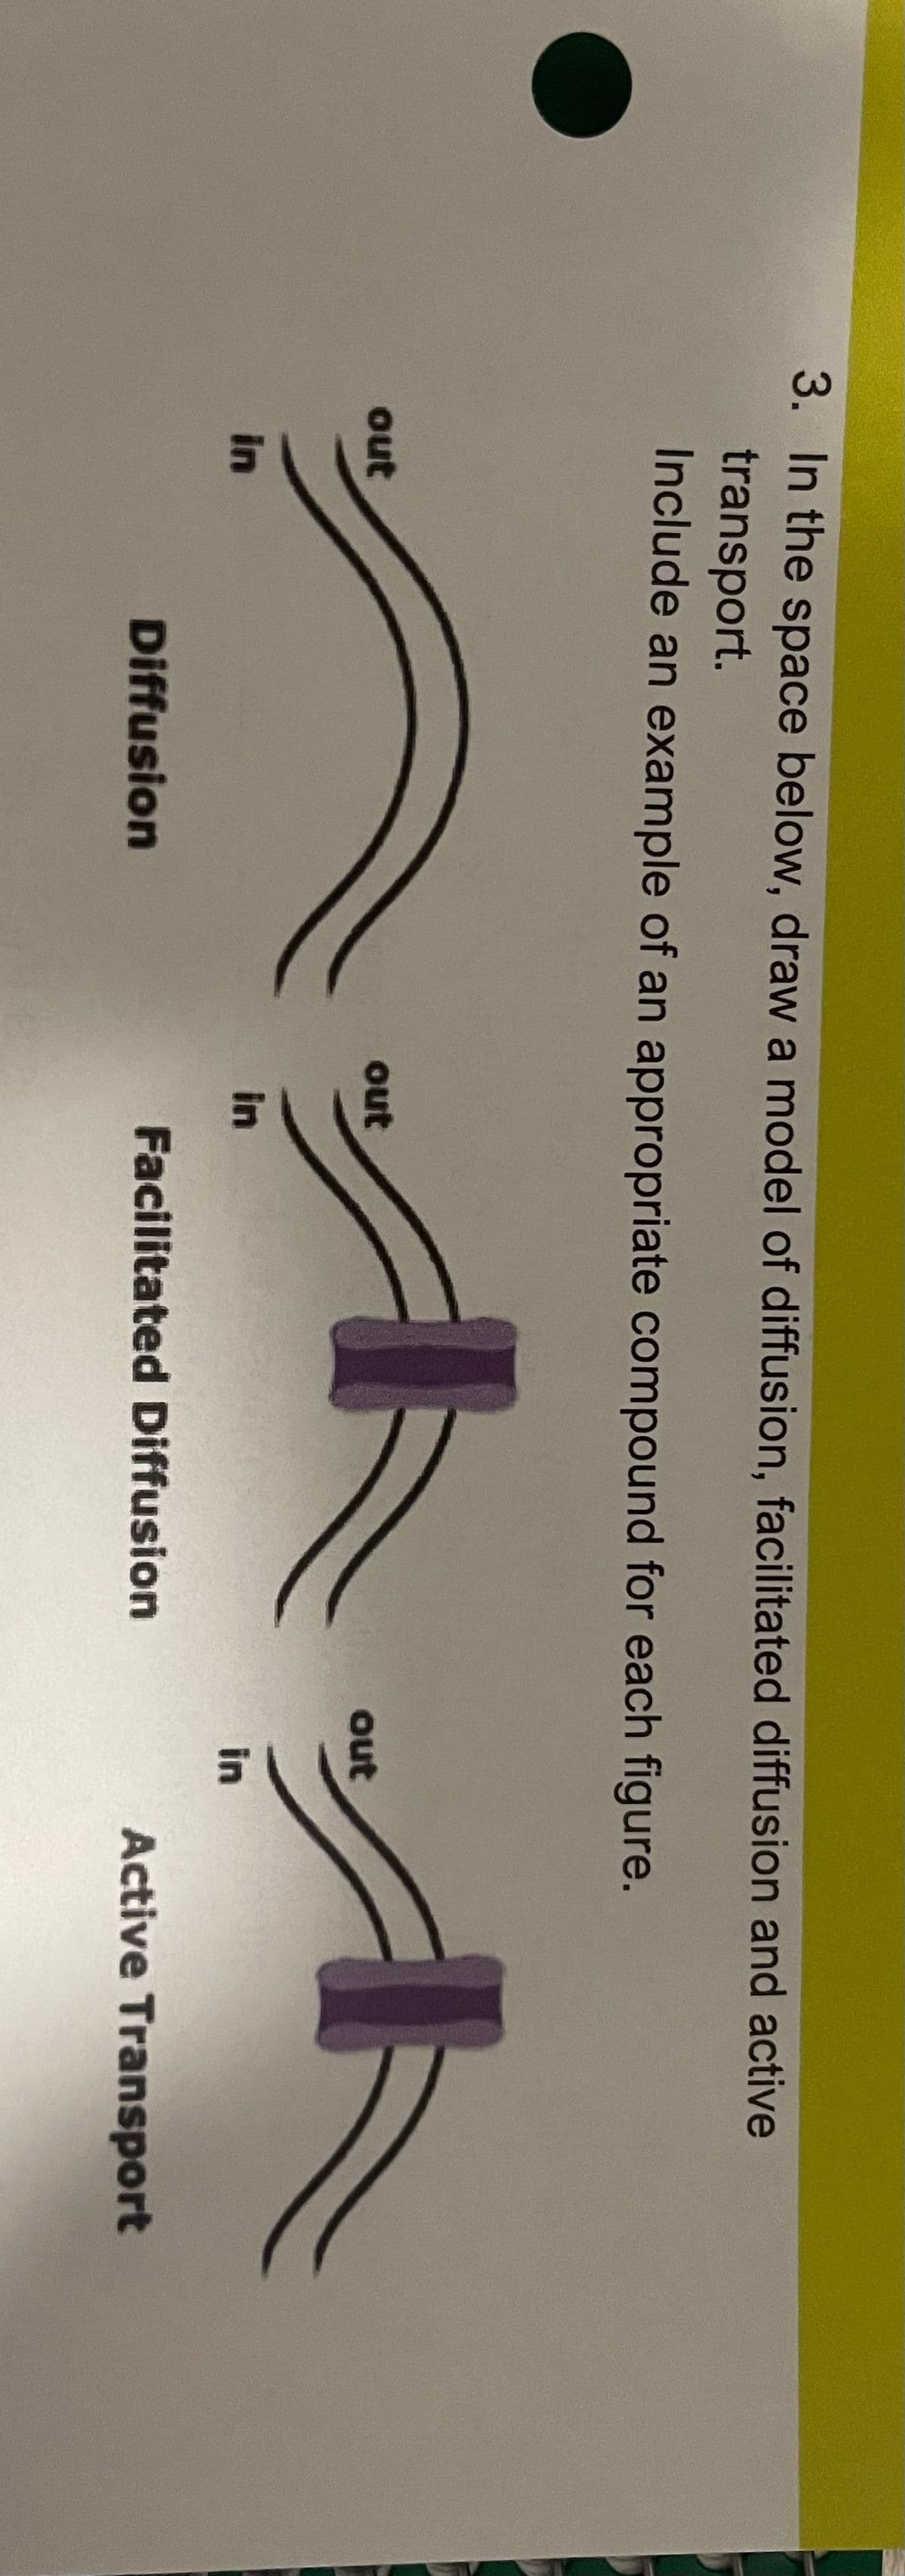 3. In the space below, draw a model of diffusion, facilitated diffusion and active
transport.
Include an example of an appropriate compound for each figure.
out
in
Diffusion
out
in
Facilitated Diffusion
out
in
Active Transport